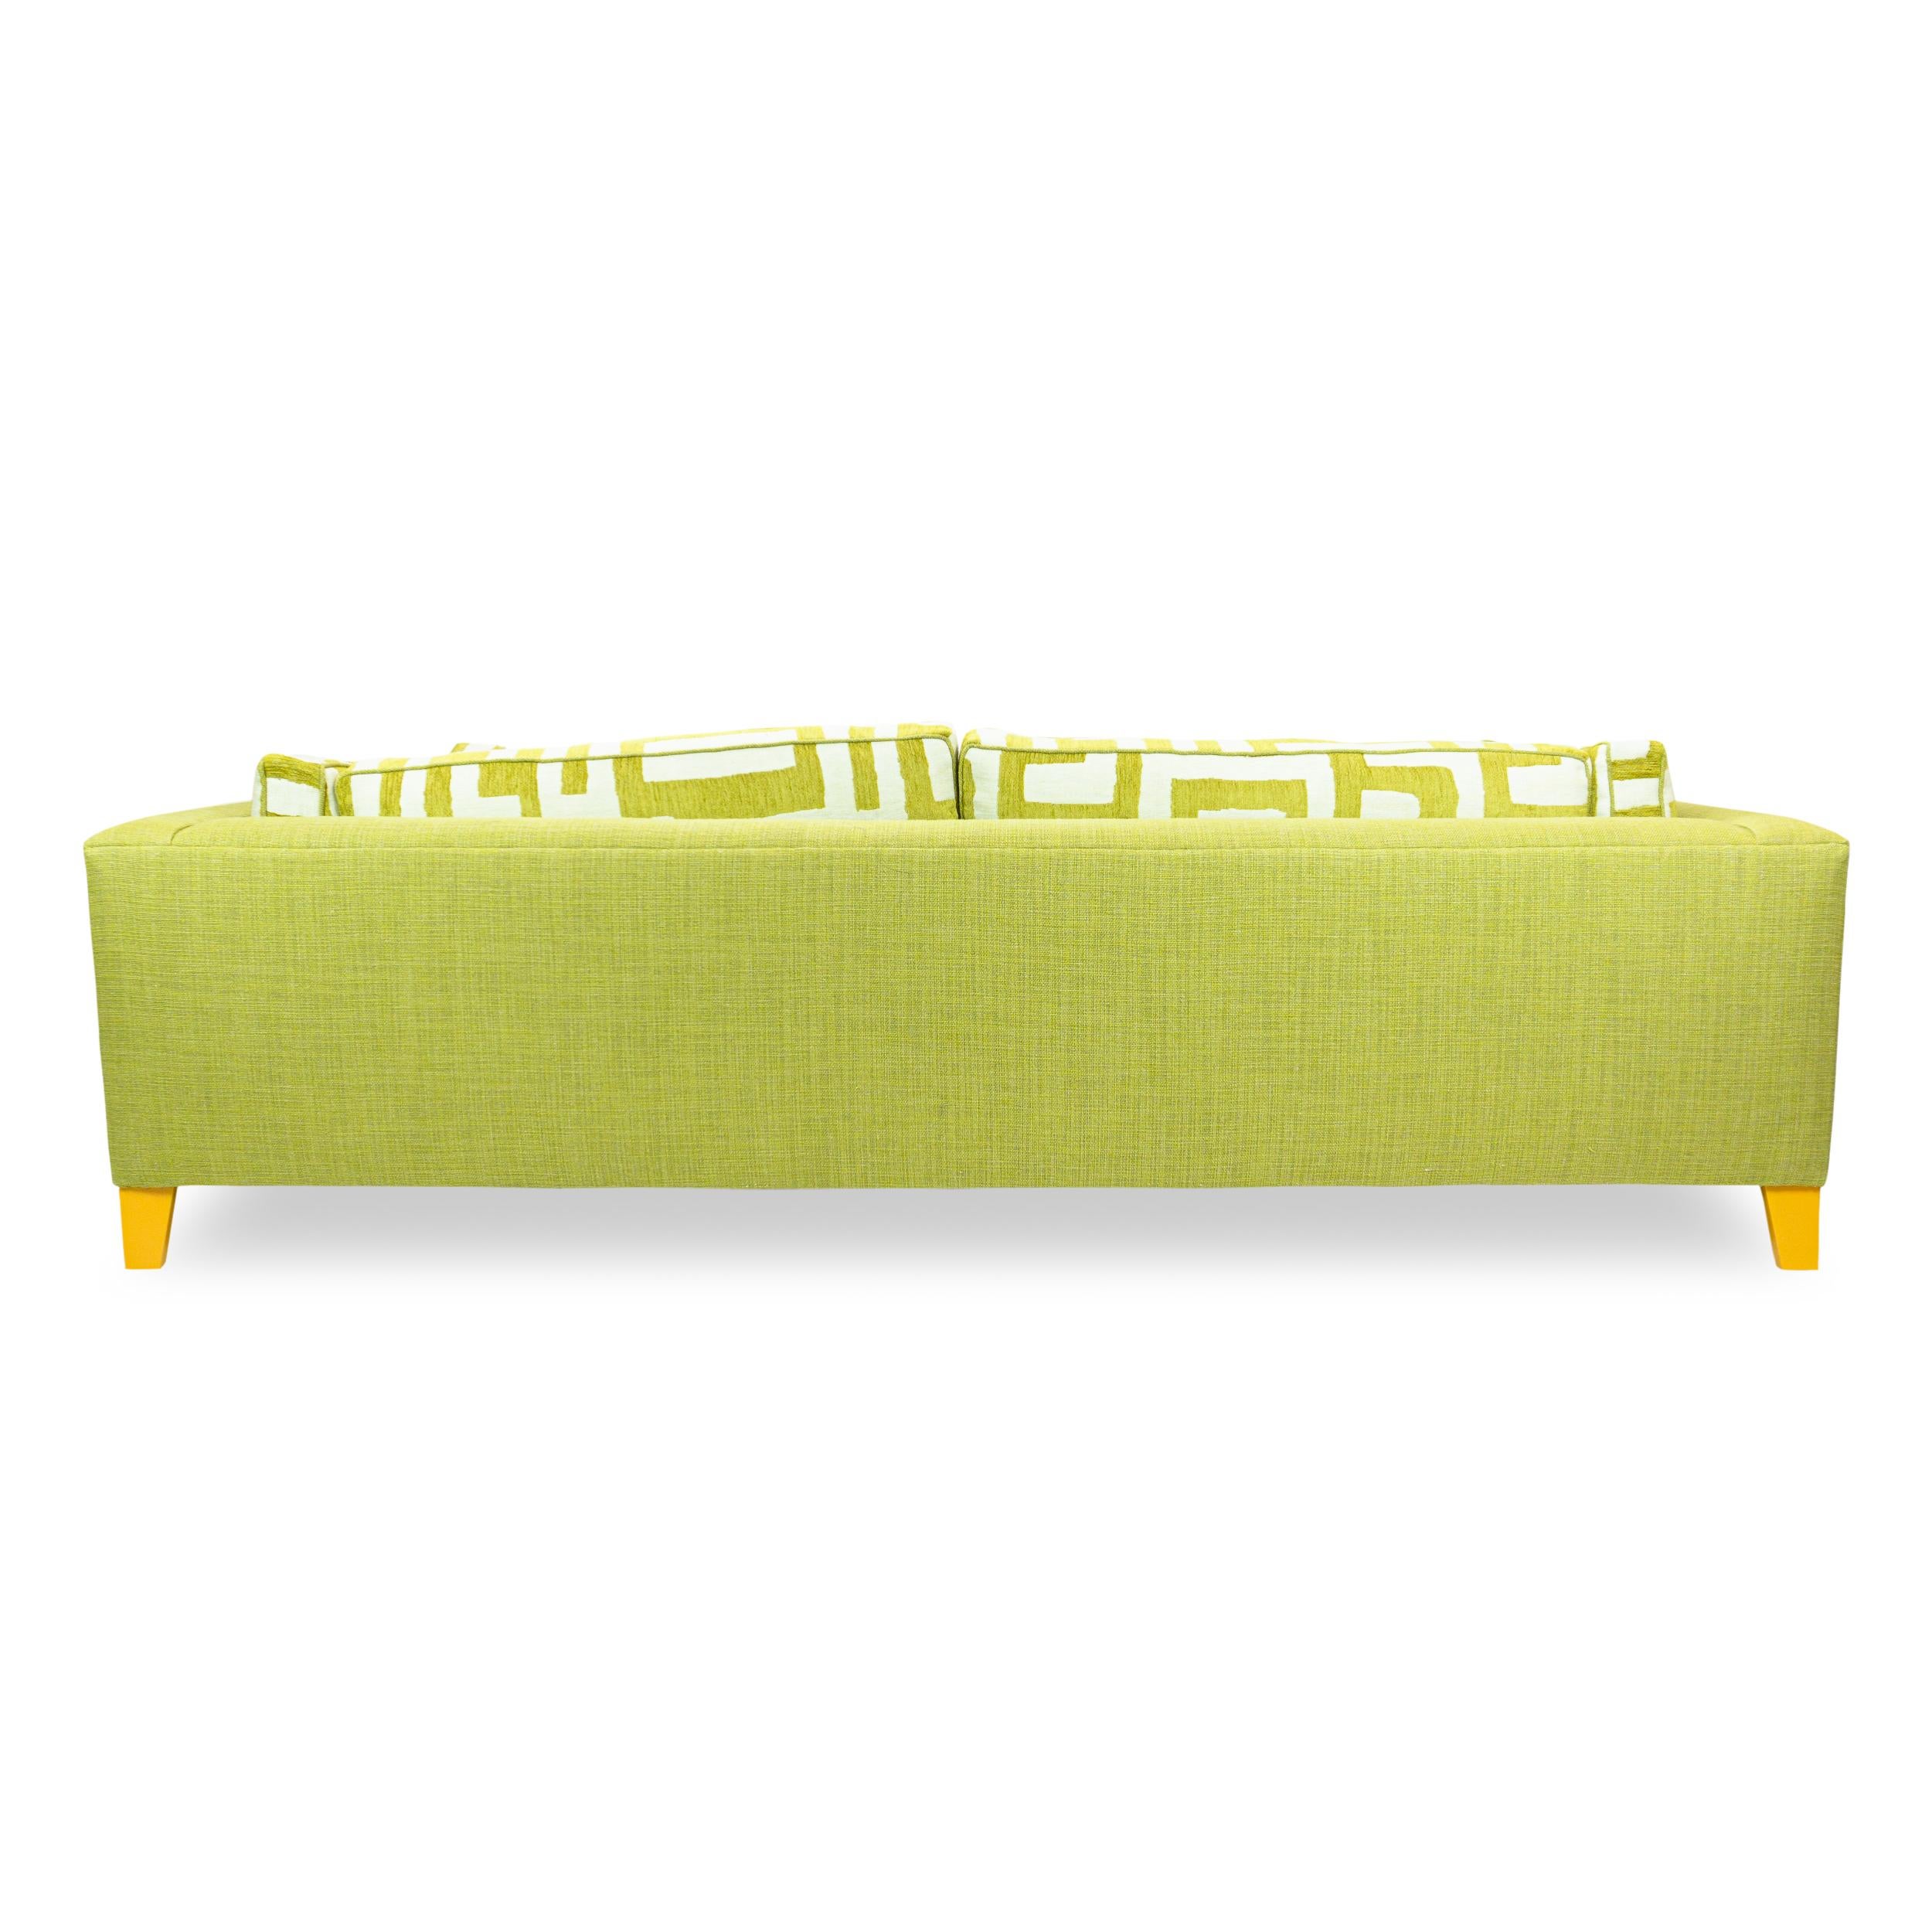 Contemporary Lime Green Bench Cushion Sofa with Maze Pattern Cushions and Sunflower Feet For Sale